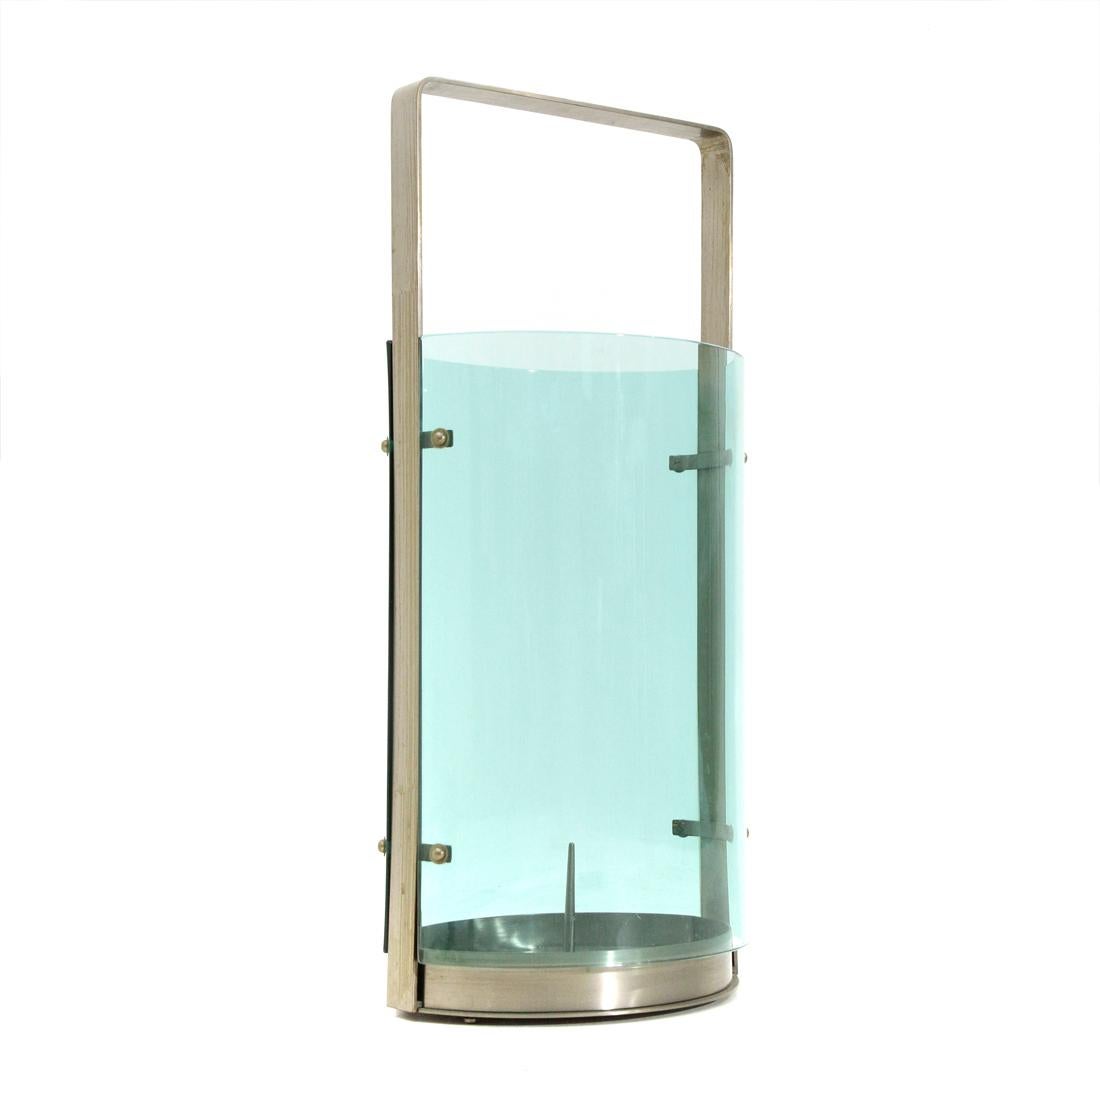 Umbrella stand produced in the 1960s by Fontana Arte based on a design by Max Ingrand.
Steel oxidized metal structure.
Curved glass nile blue.
Good general condition, some signs due to normal use over time.

Dimensions: Length 29 cm, depth 22.5